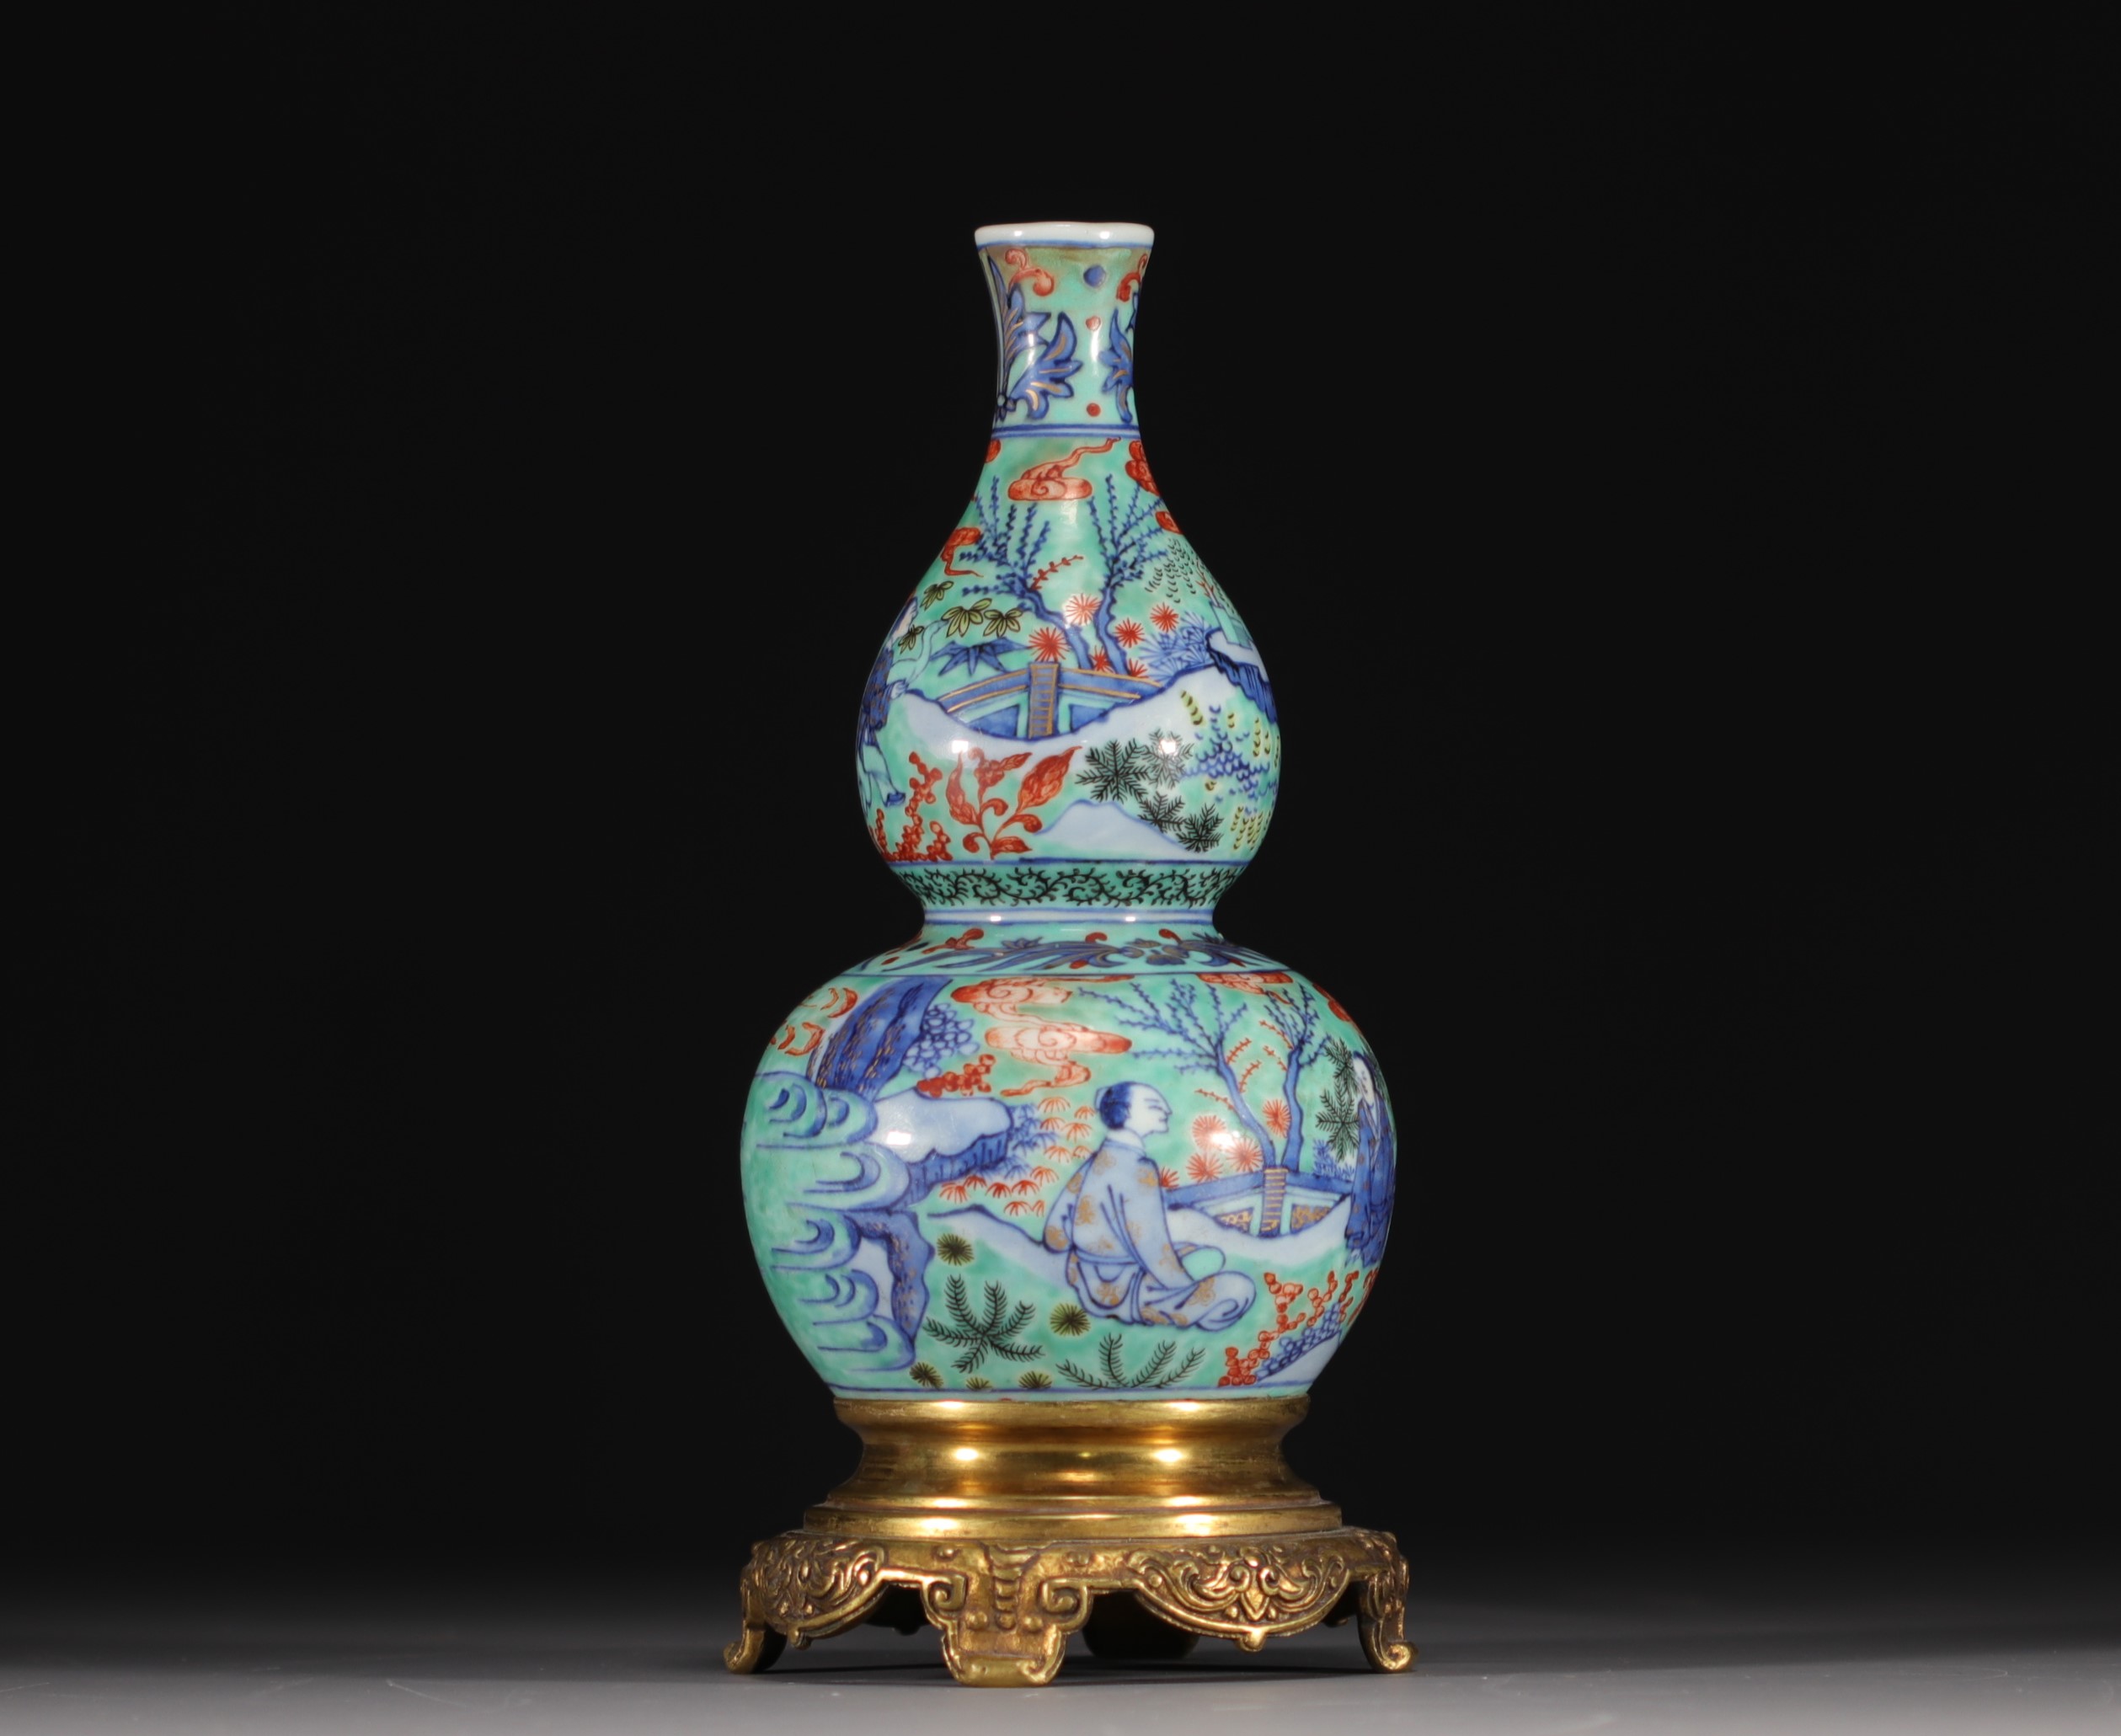 China - Porcelain double gourd vase with figures, gilt bronze mounting, Qing period. - Image 2 of 6